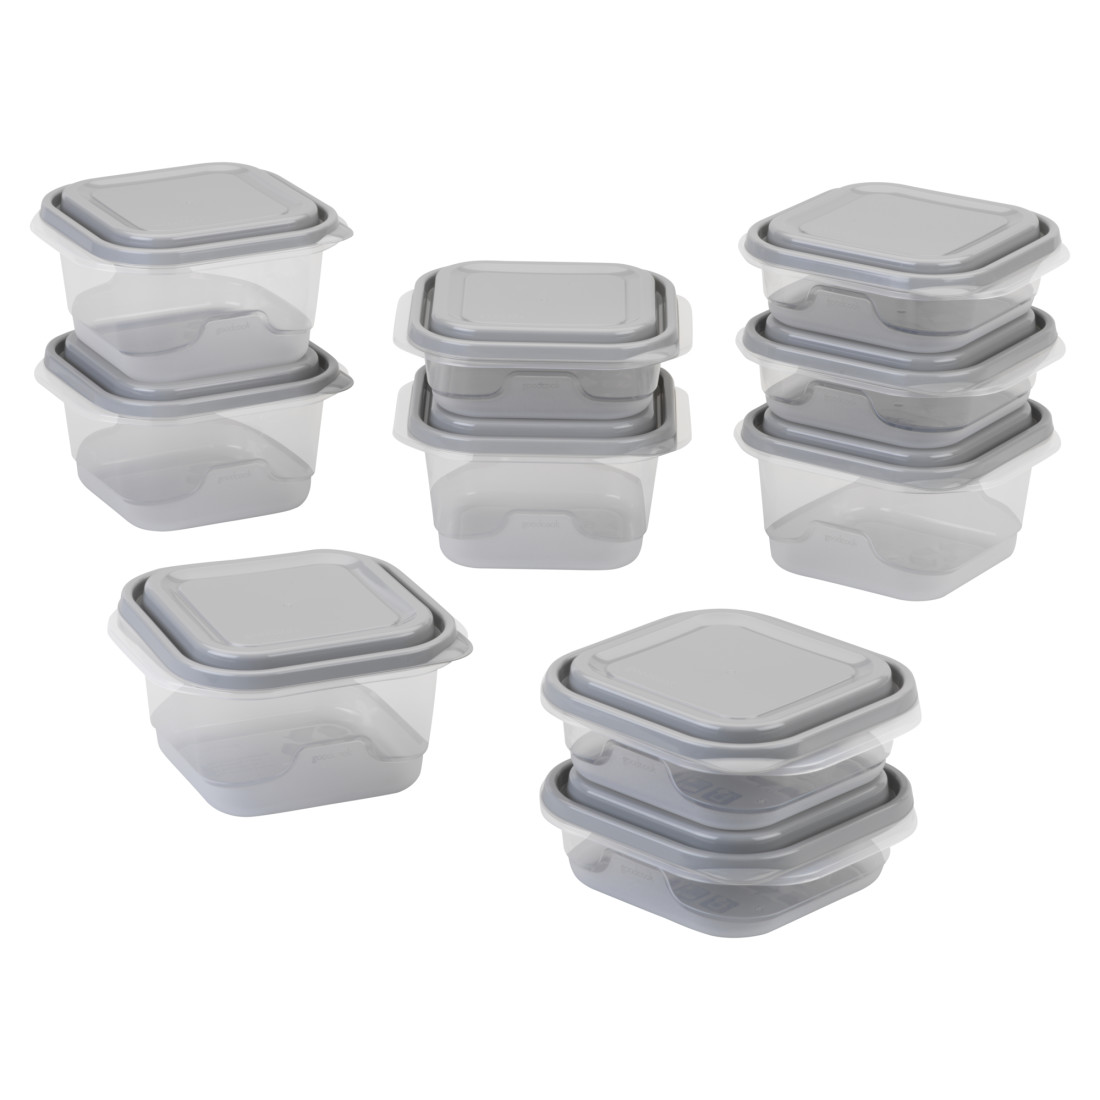 Ideas for repurposing glass dessert containers from costco?! : r